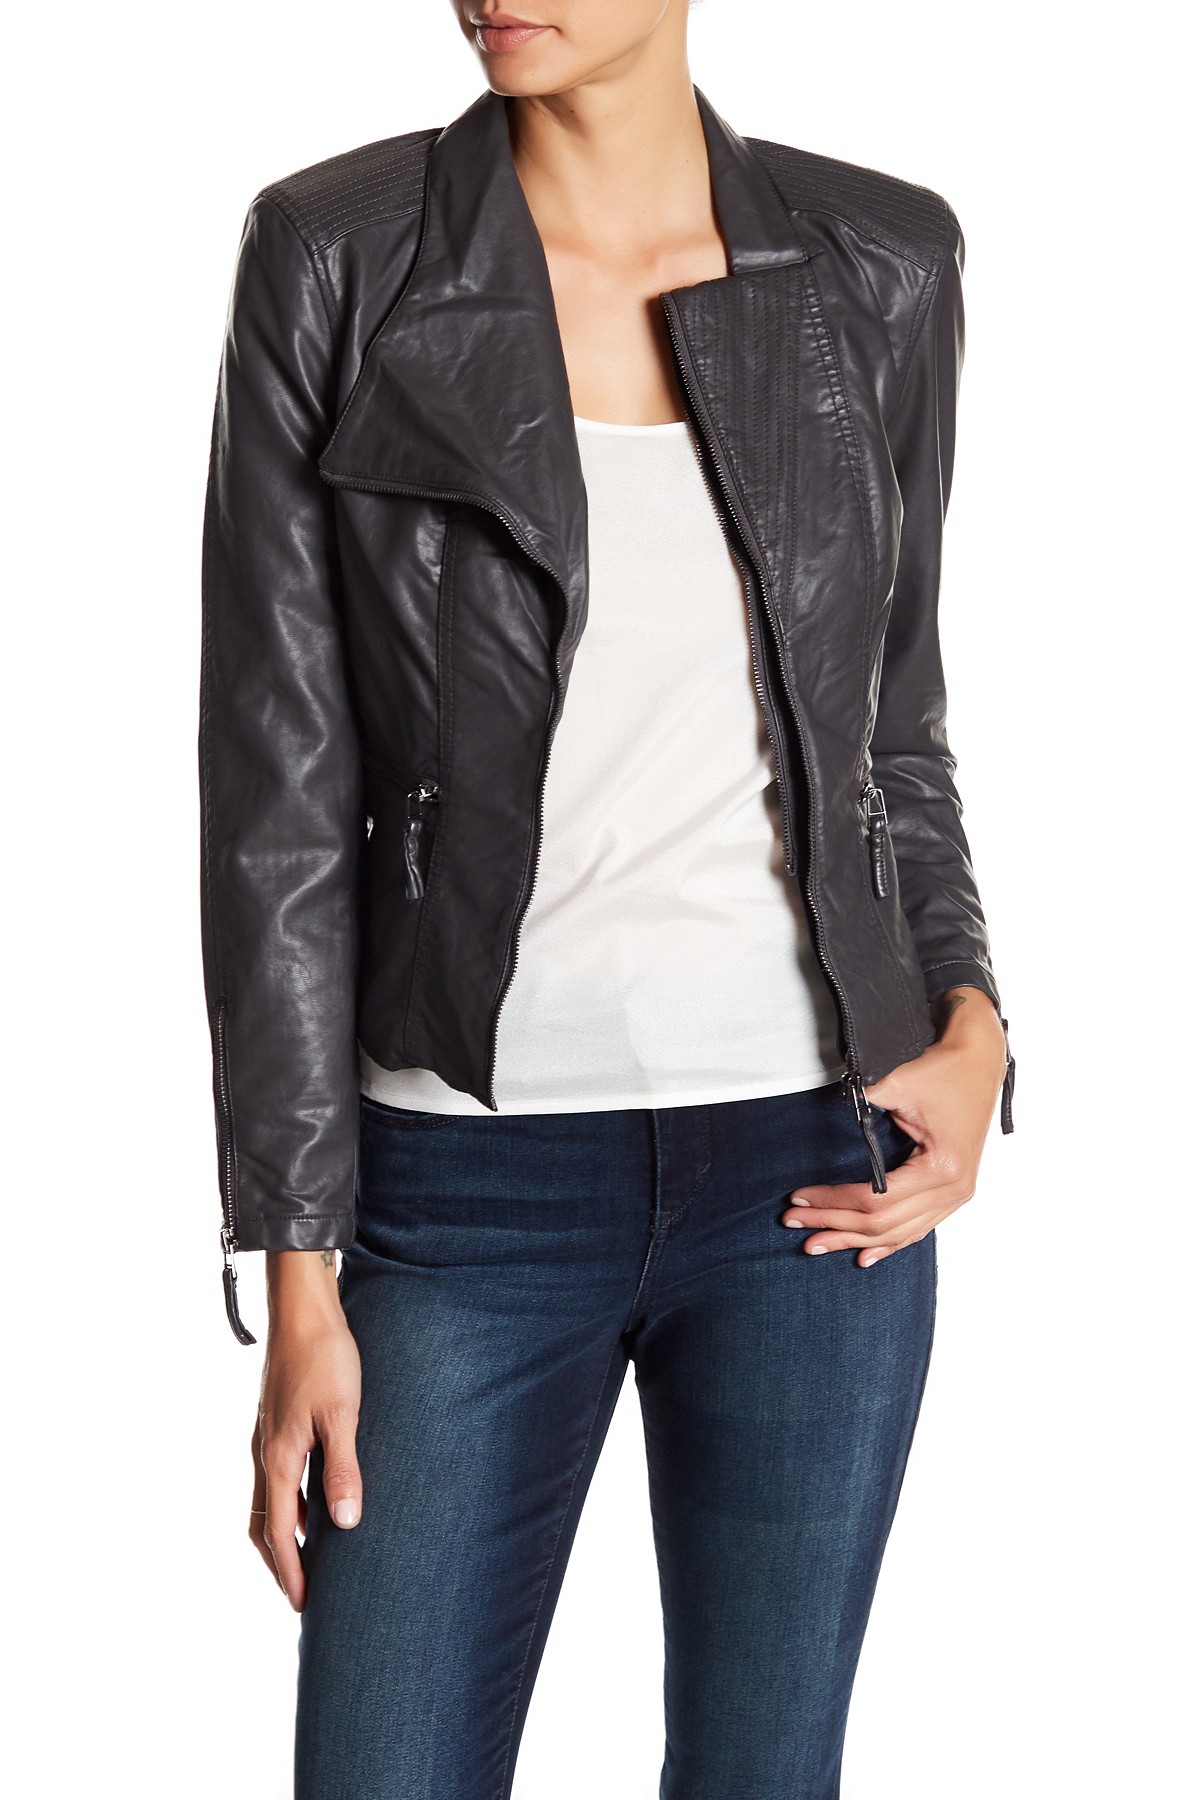 leather jackets image of blanknyc denim faux leather fitted moto jacket GSZTOCY